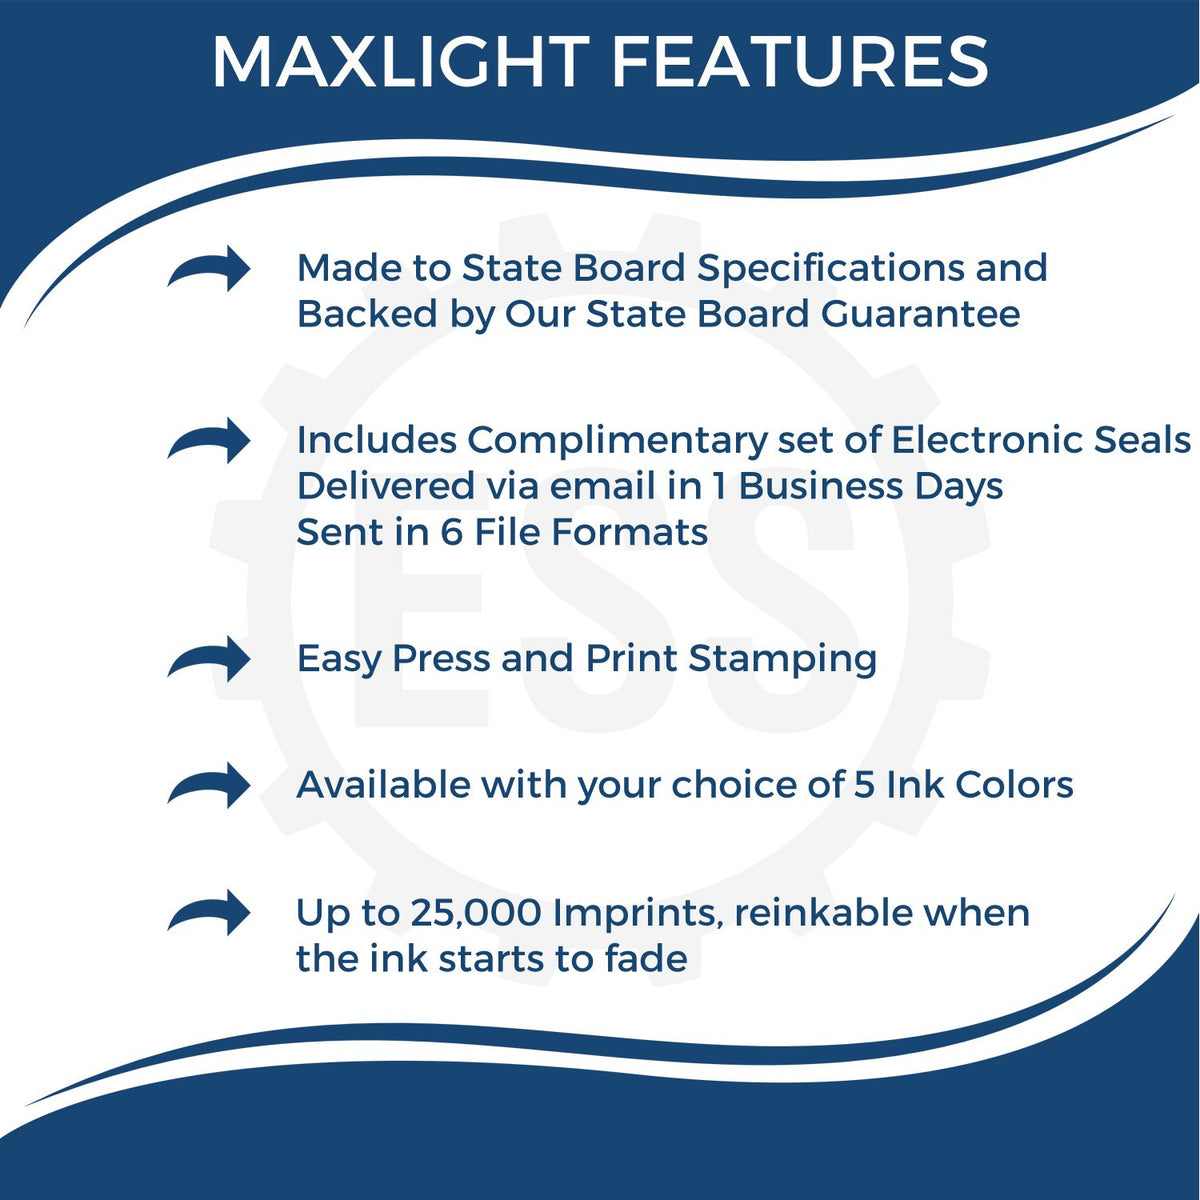 A picture of an infographic highlighting the selling points for the Premium MaxLight Pre-Inked Michigan Engineering Stamp